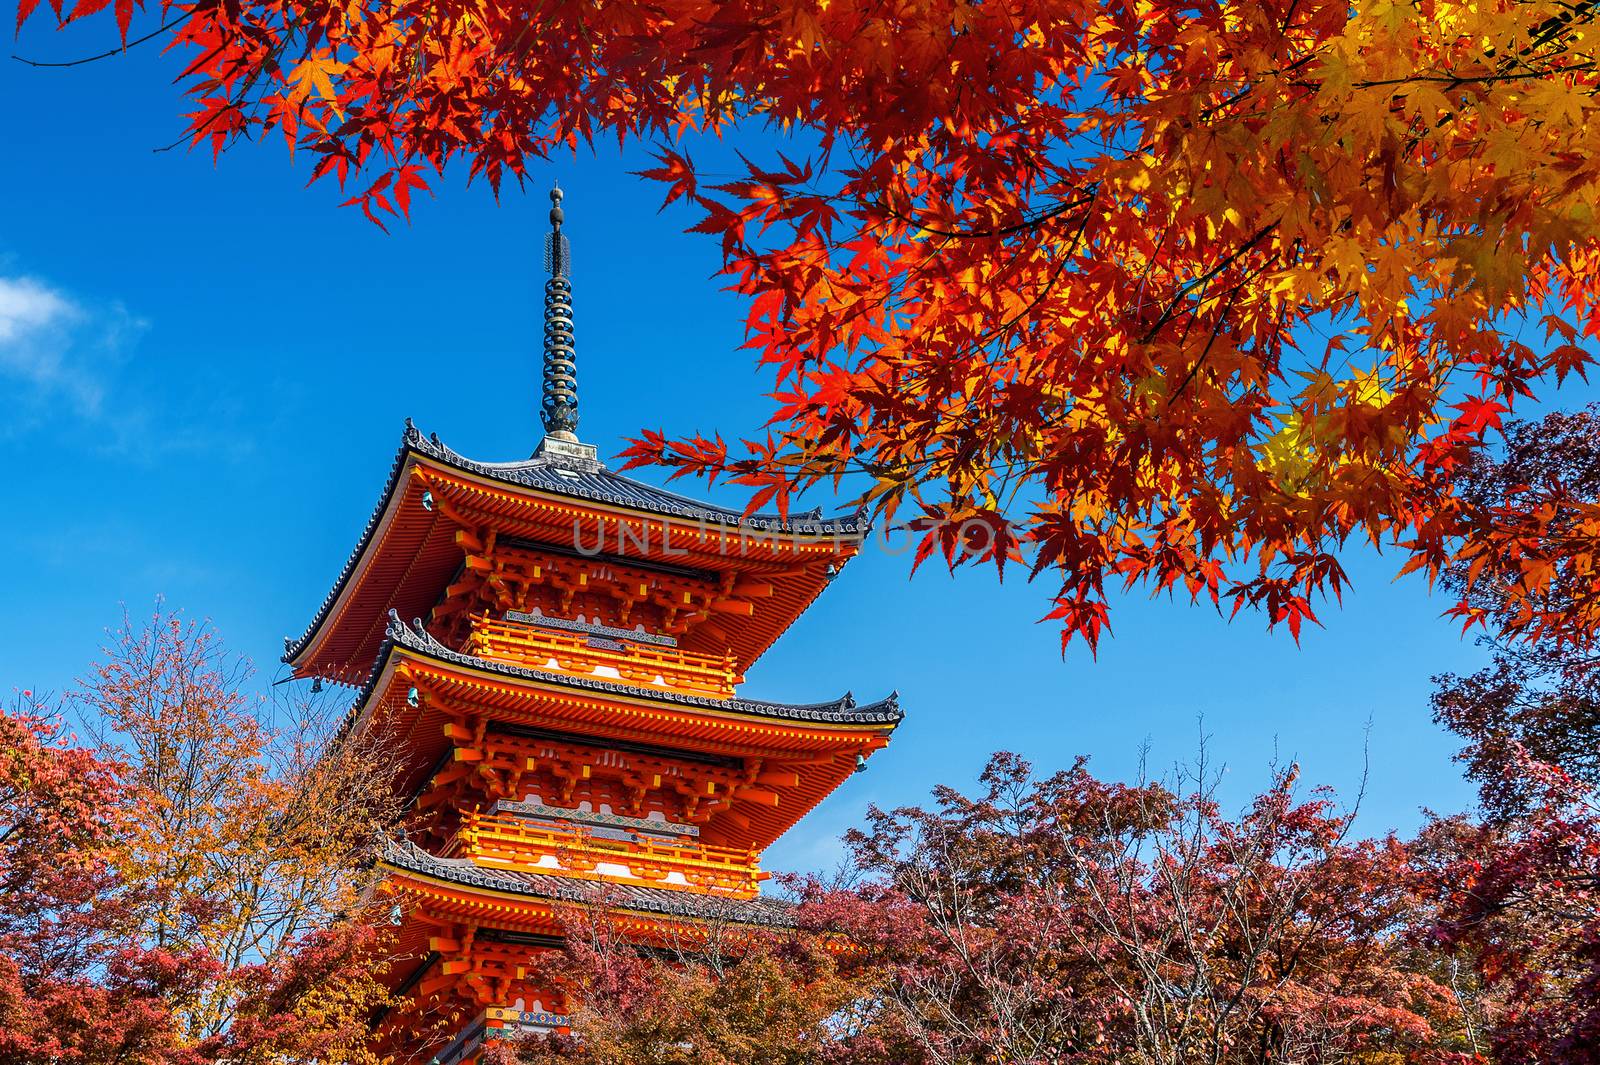 Red pagoda and maple tree in autumn, Kyoto in Japan. by gutarphotoghaphy